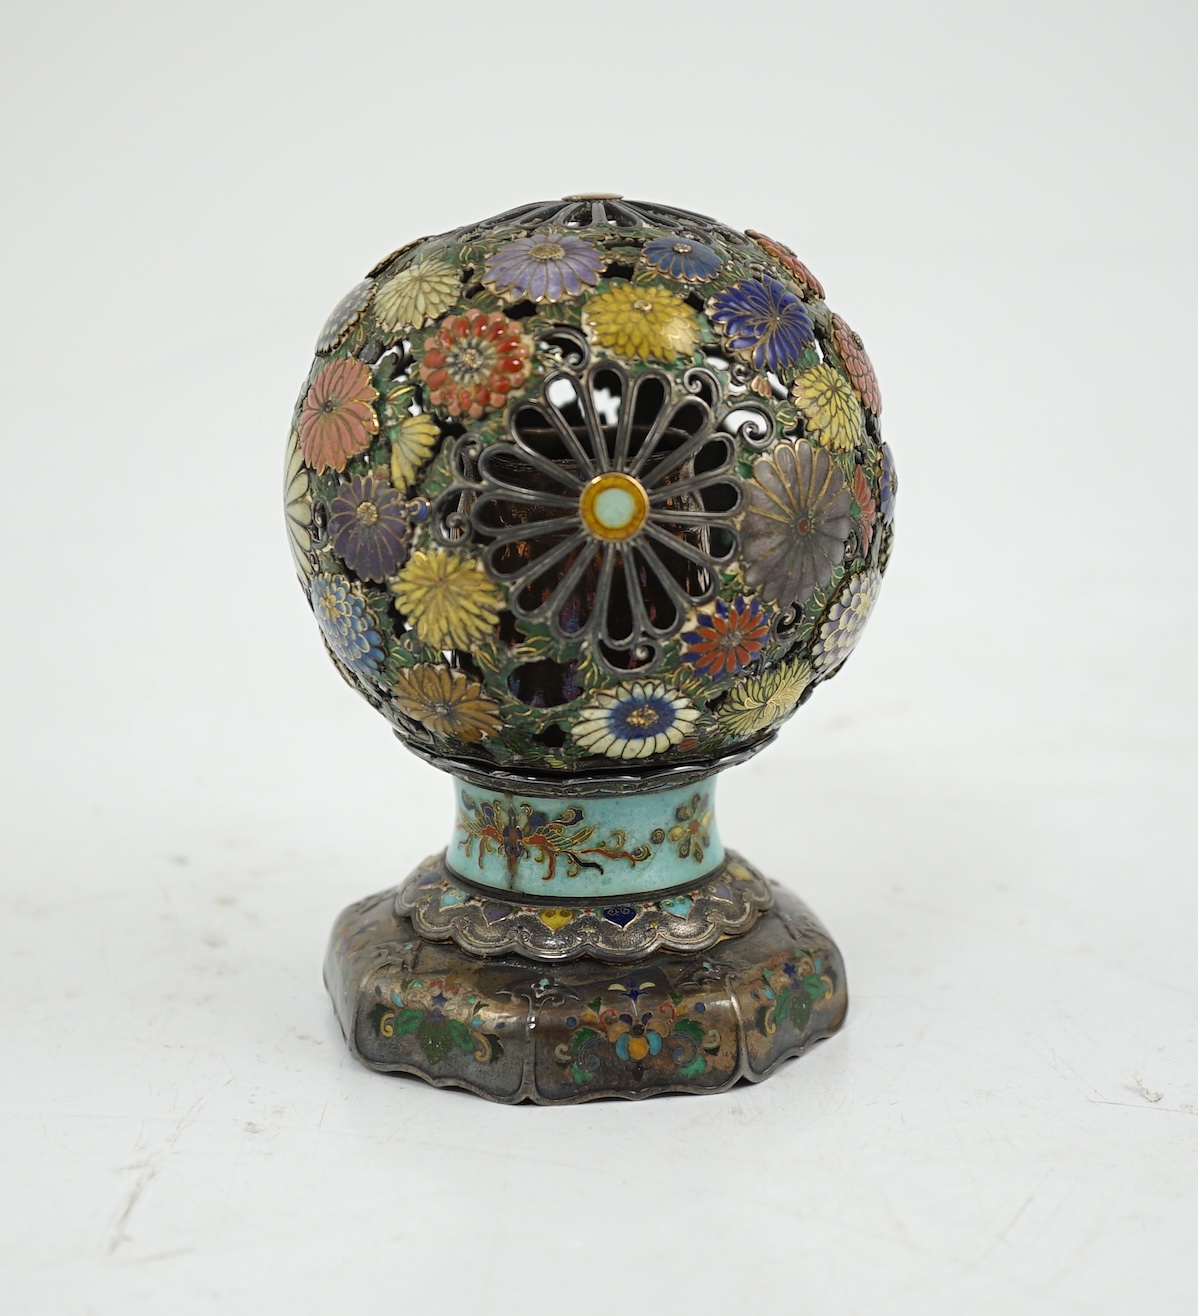 A Japanese silver and enamel globe-shaped koro and cover, Meiji period, some damage